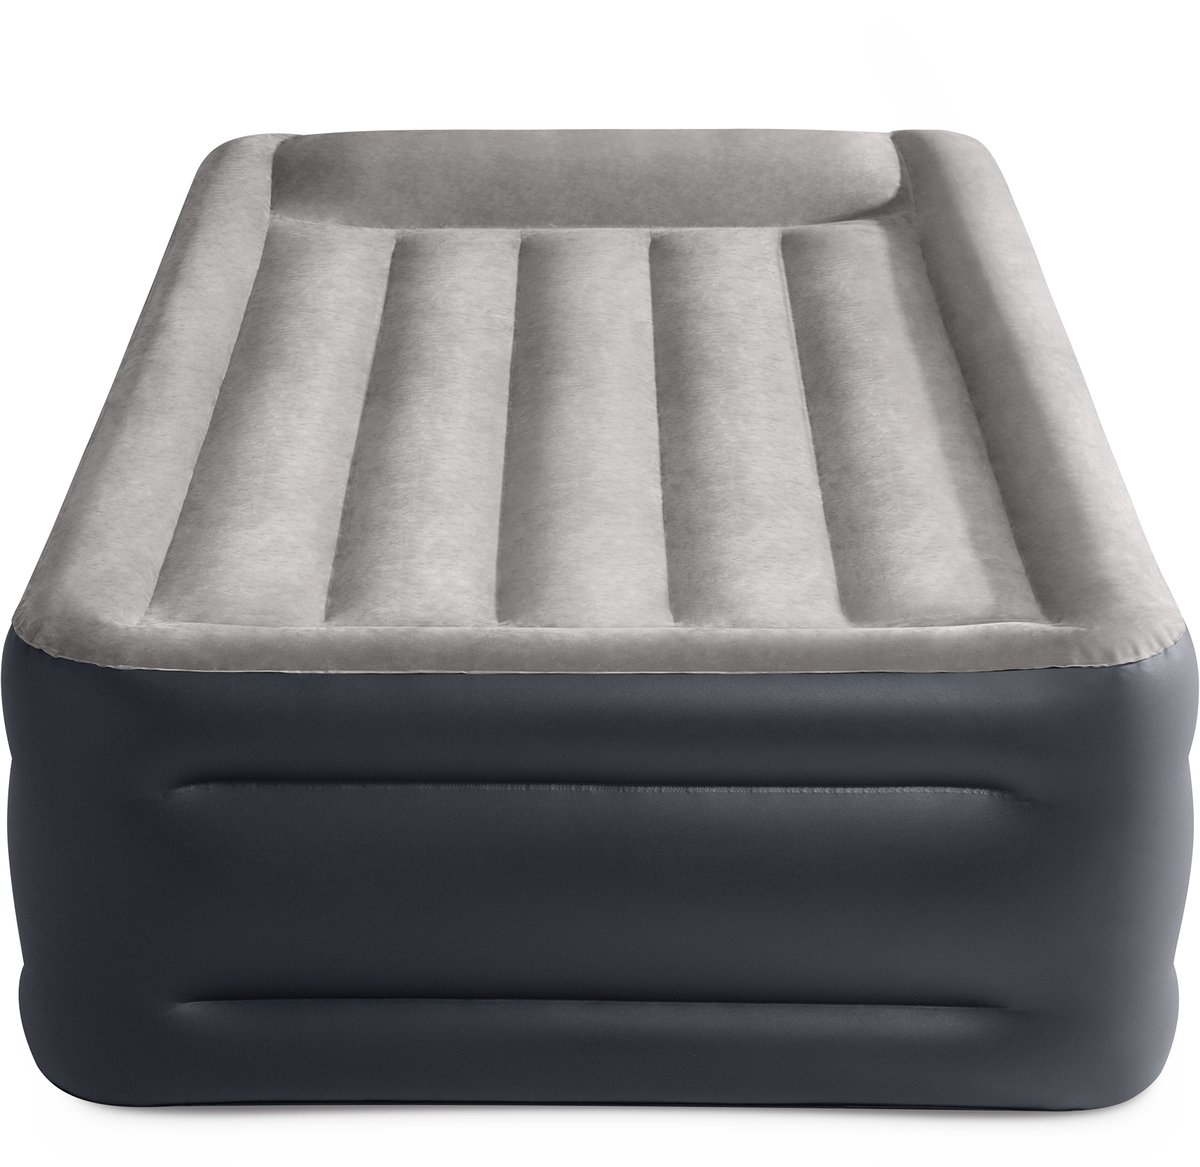 Intex Twin Deluxe Pillow Rest Luchtbed - 191x99x42 cm